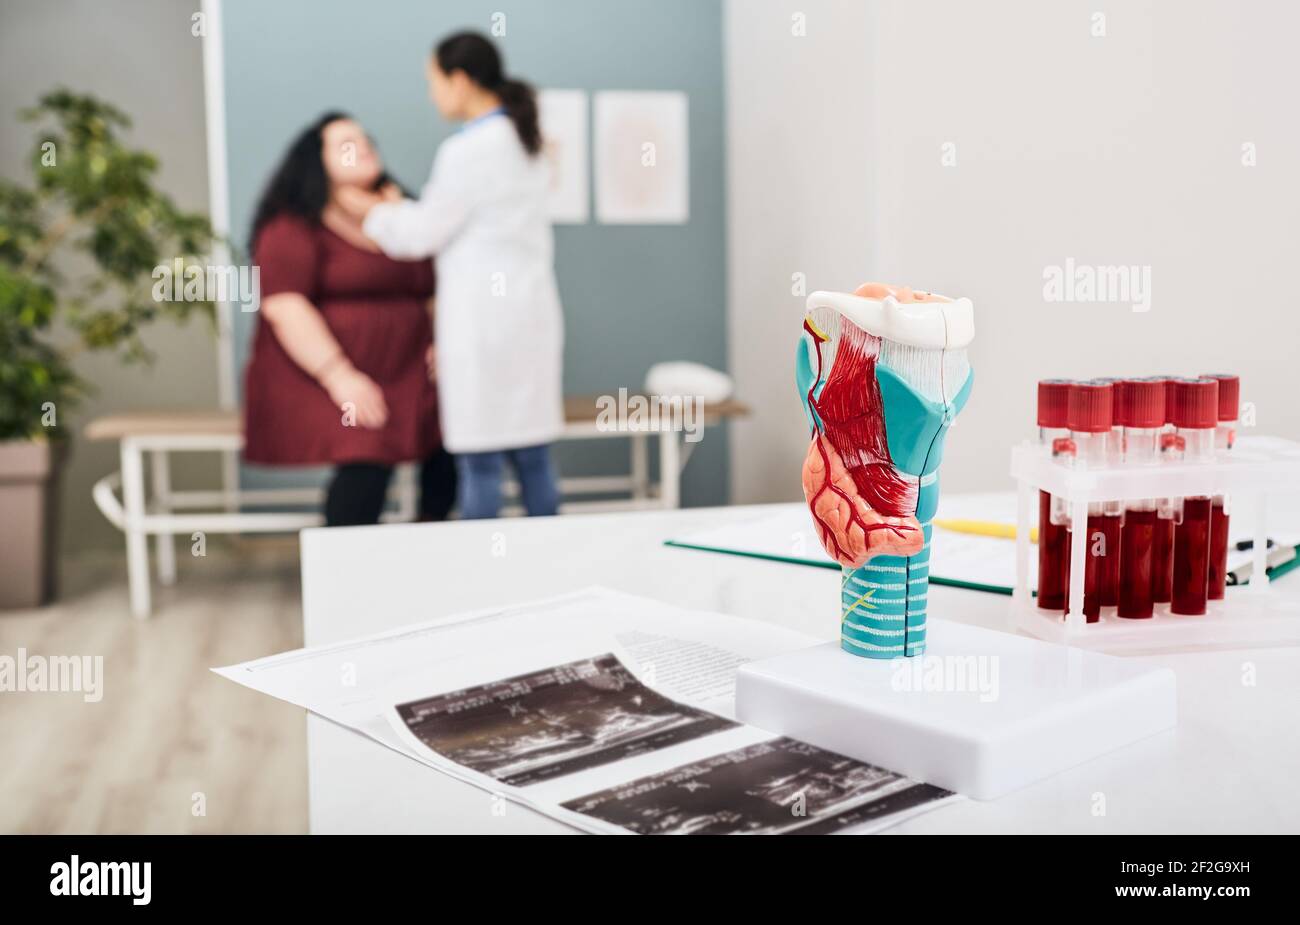 Thyroid anatomical model and thyroid hormone blood test tubes, close-up. doctor probes the neck of a fat woman in background Stock Photo